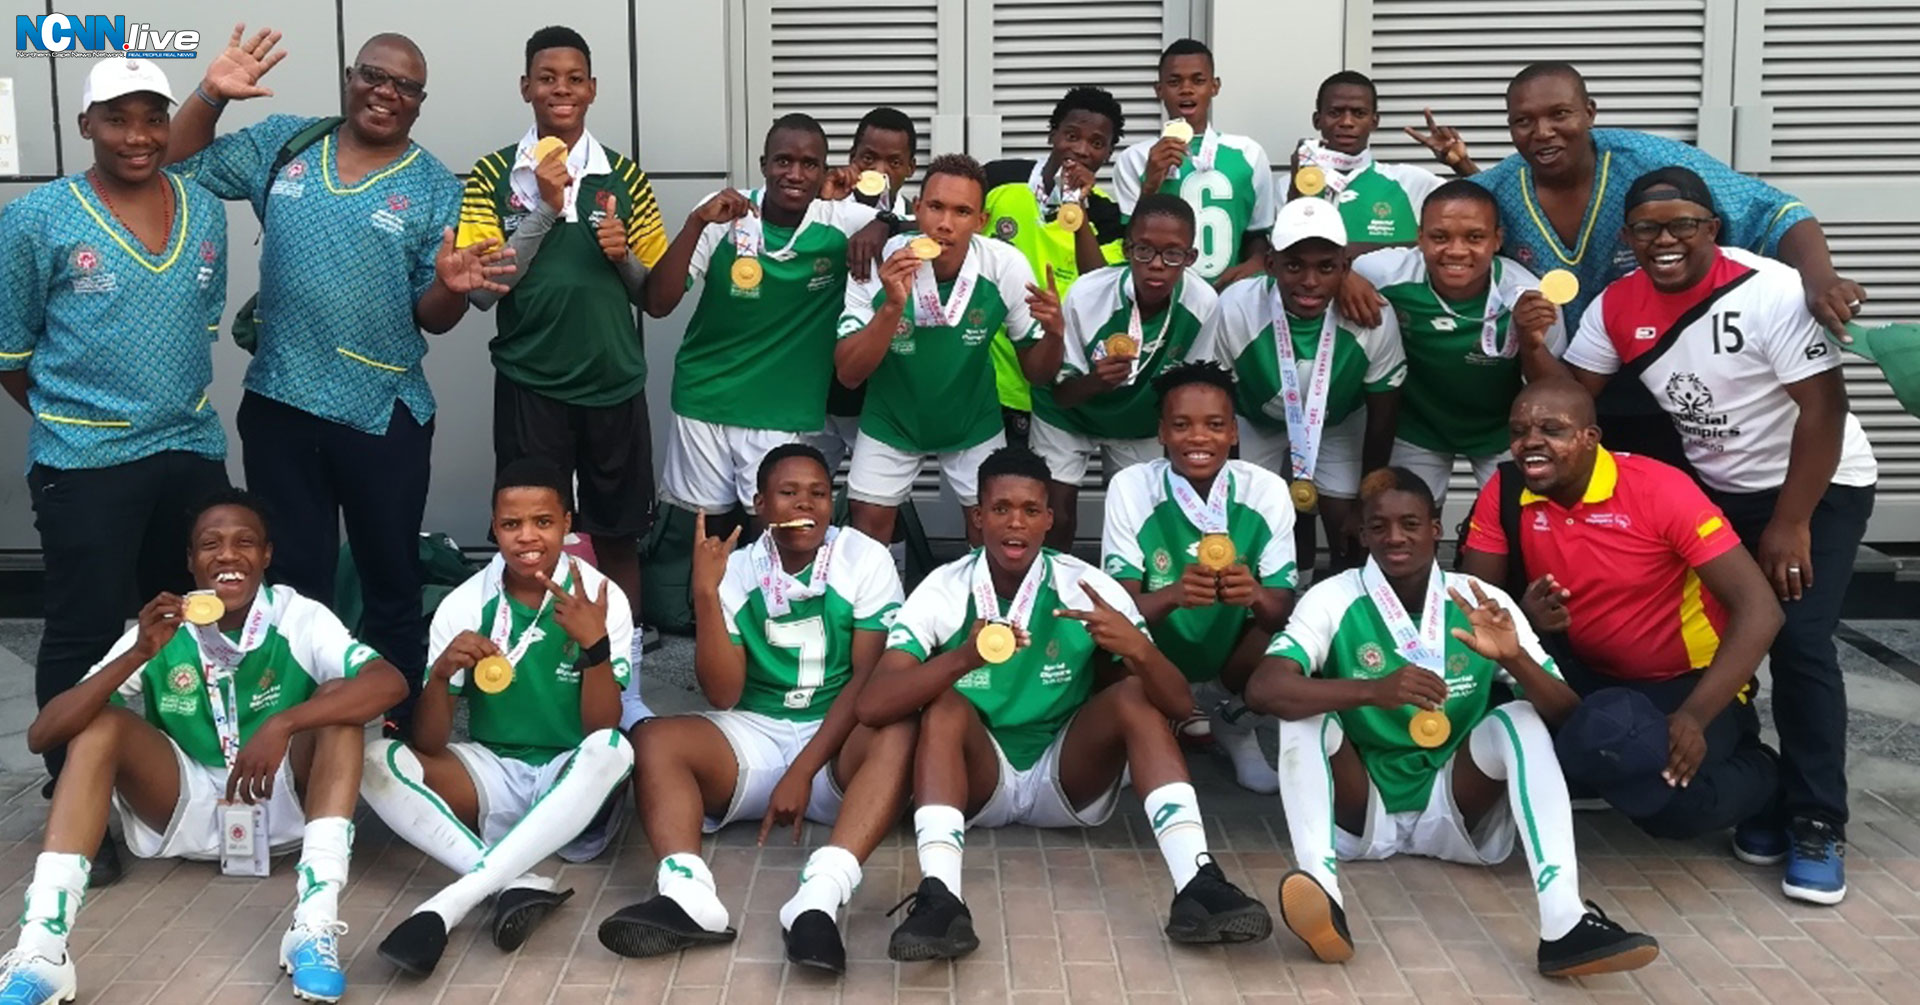 Boitumelo_Special_School_Wins_Gold_For_South_Africa-20190320-FI